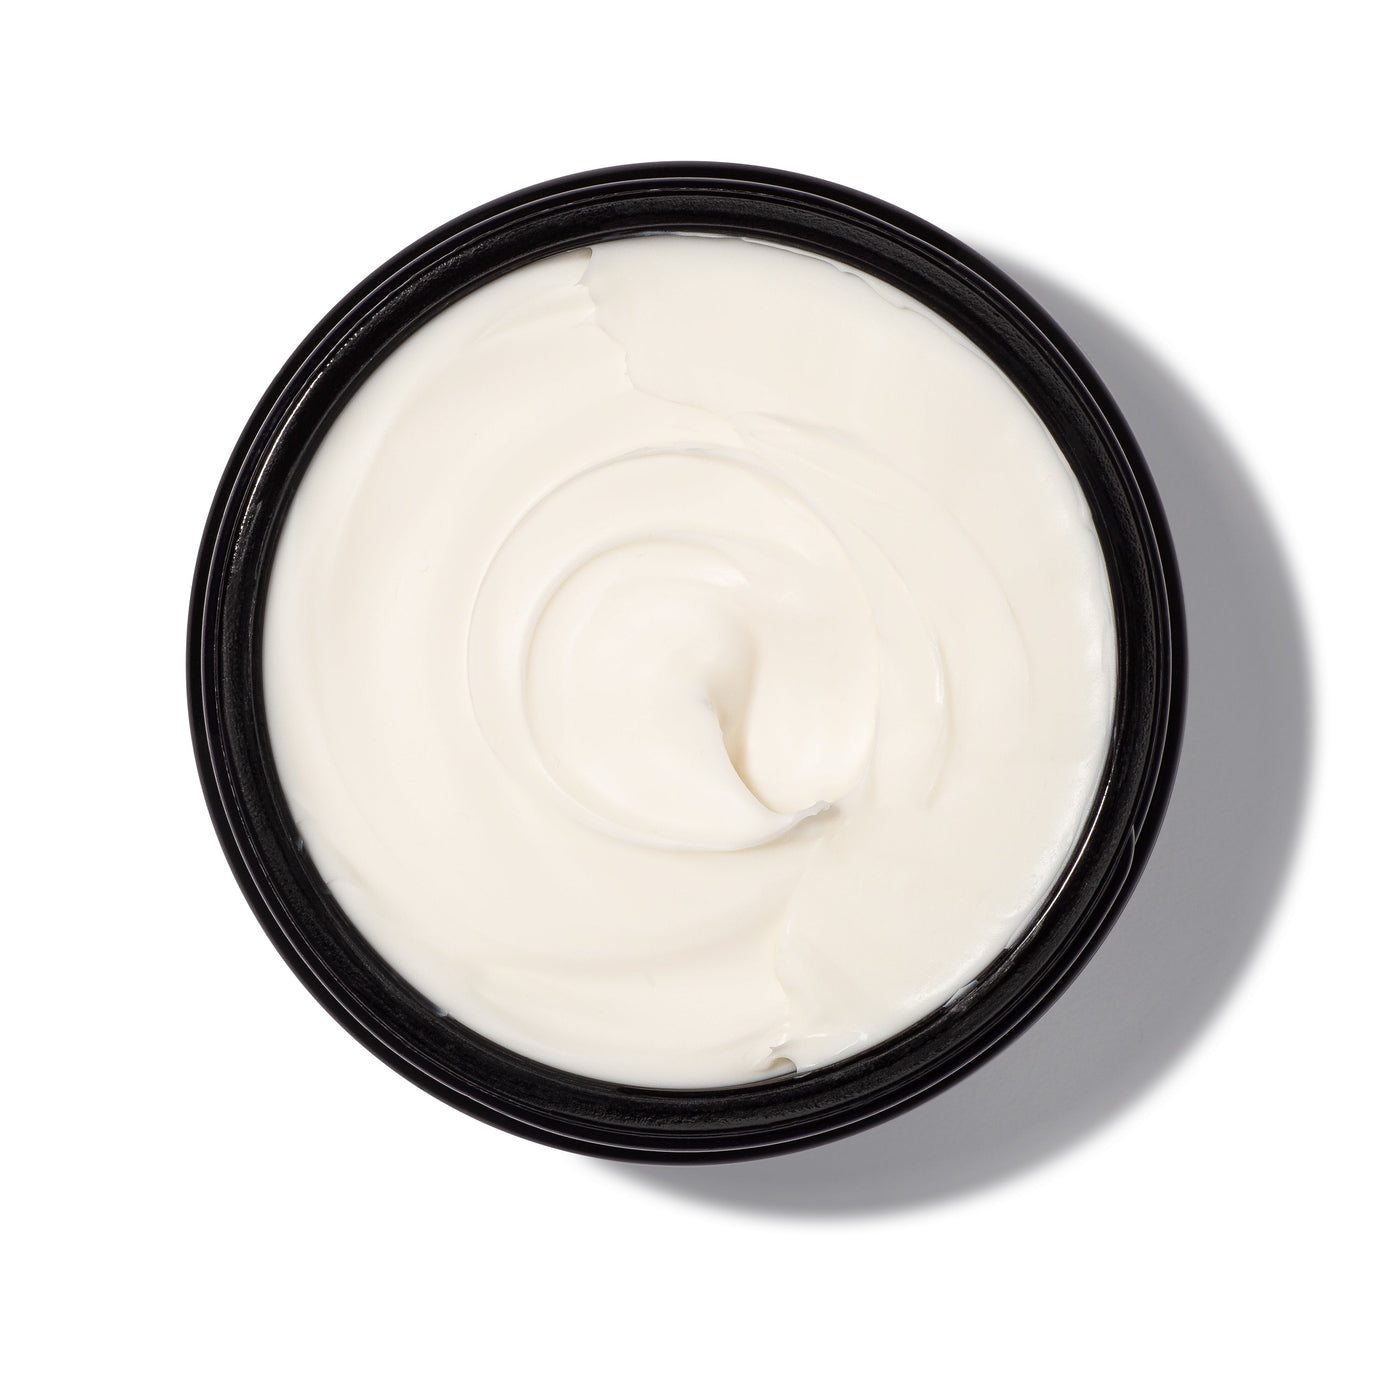 Body Cream with Kokum Butter and Argan Oil - 6 oz